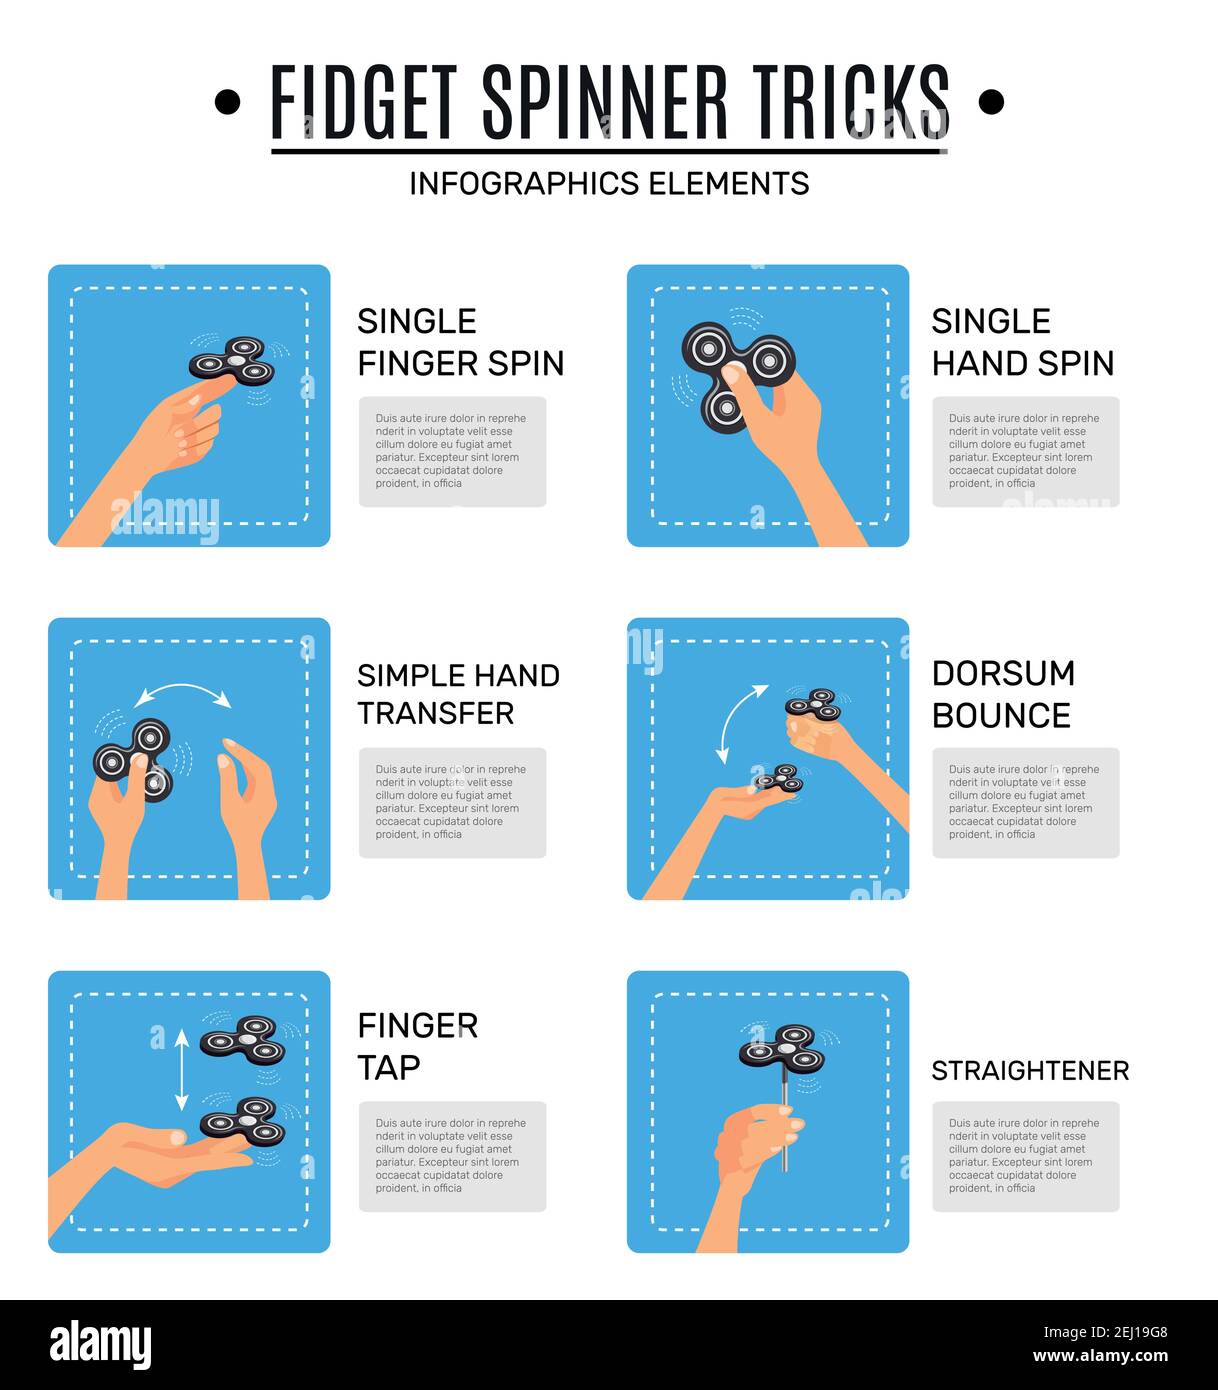 Fidget spinner stress relieving toy tricks infographic elements collection  with flat icons and description text isolated vector illustration Stock  Vector Image & Art - Alamy